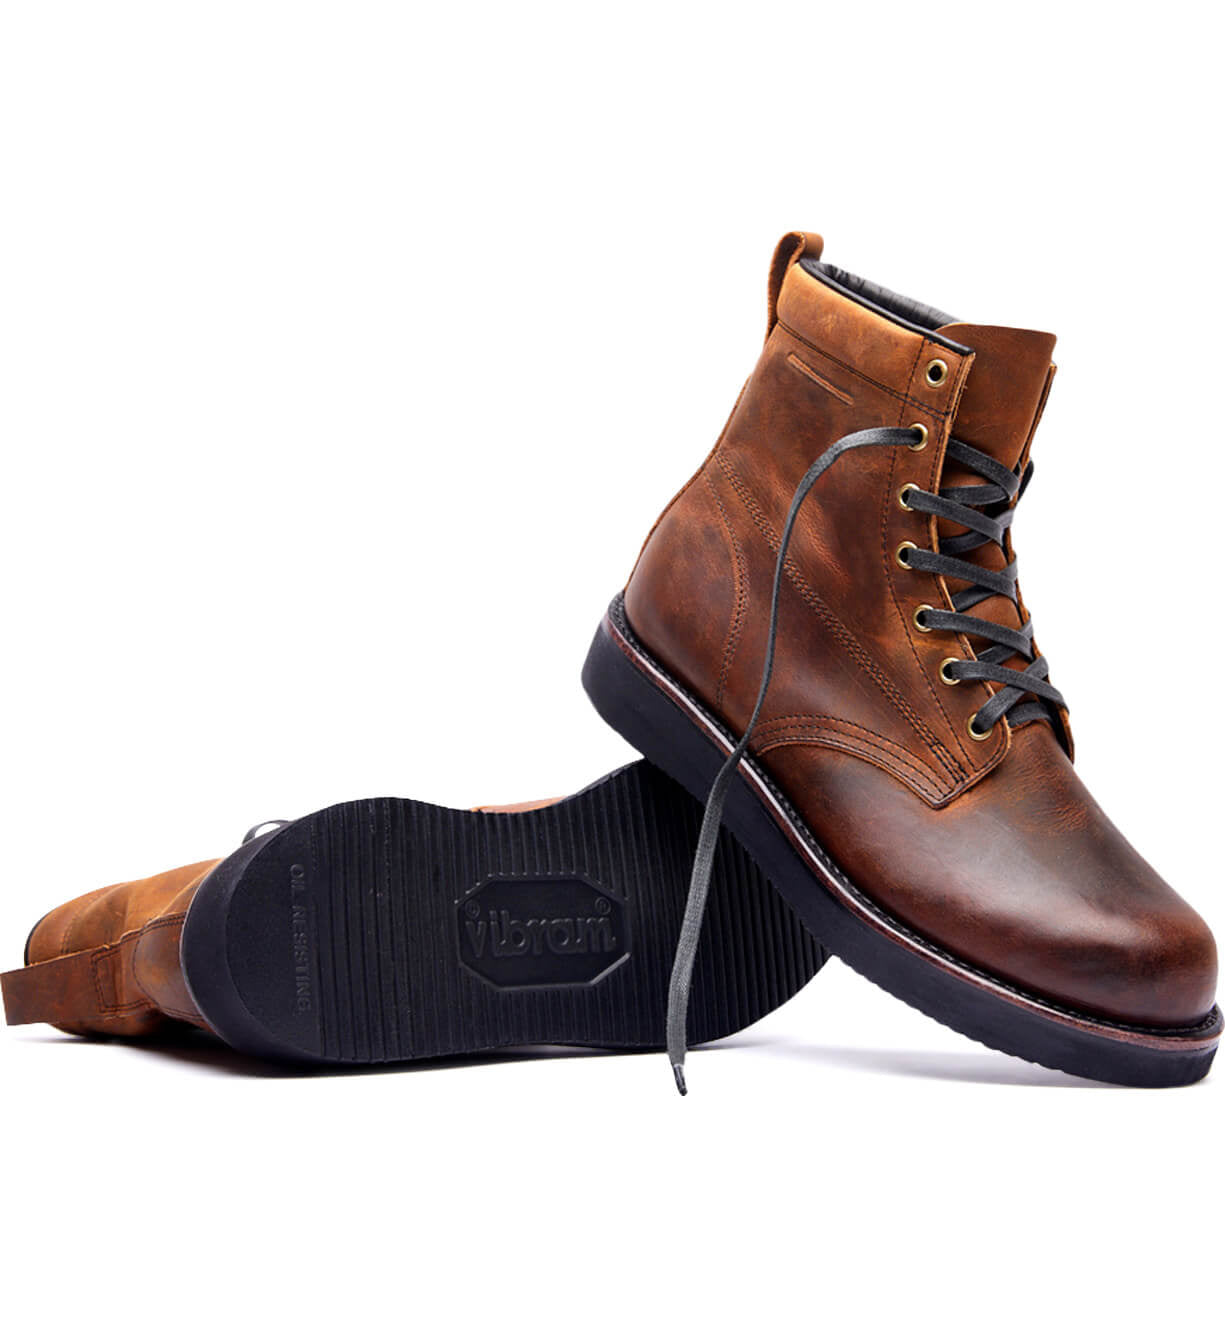 A pair of brown leather James boots by Broken Homme on a white background.